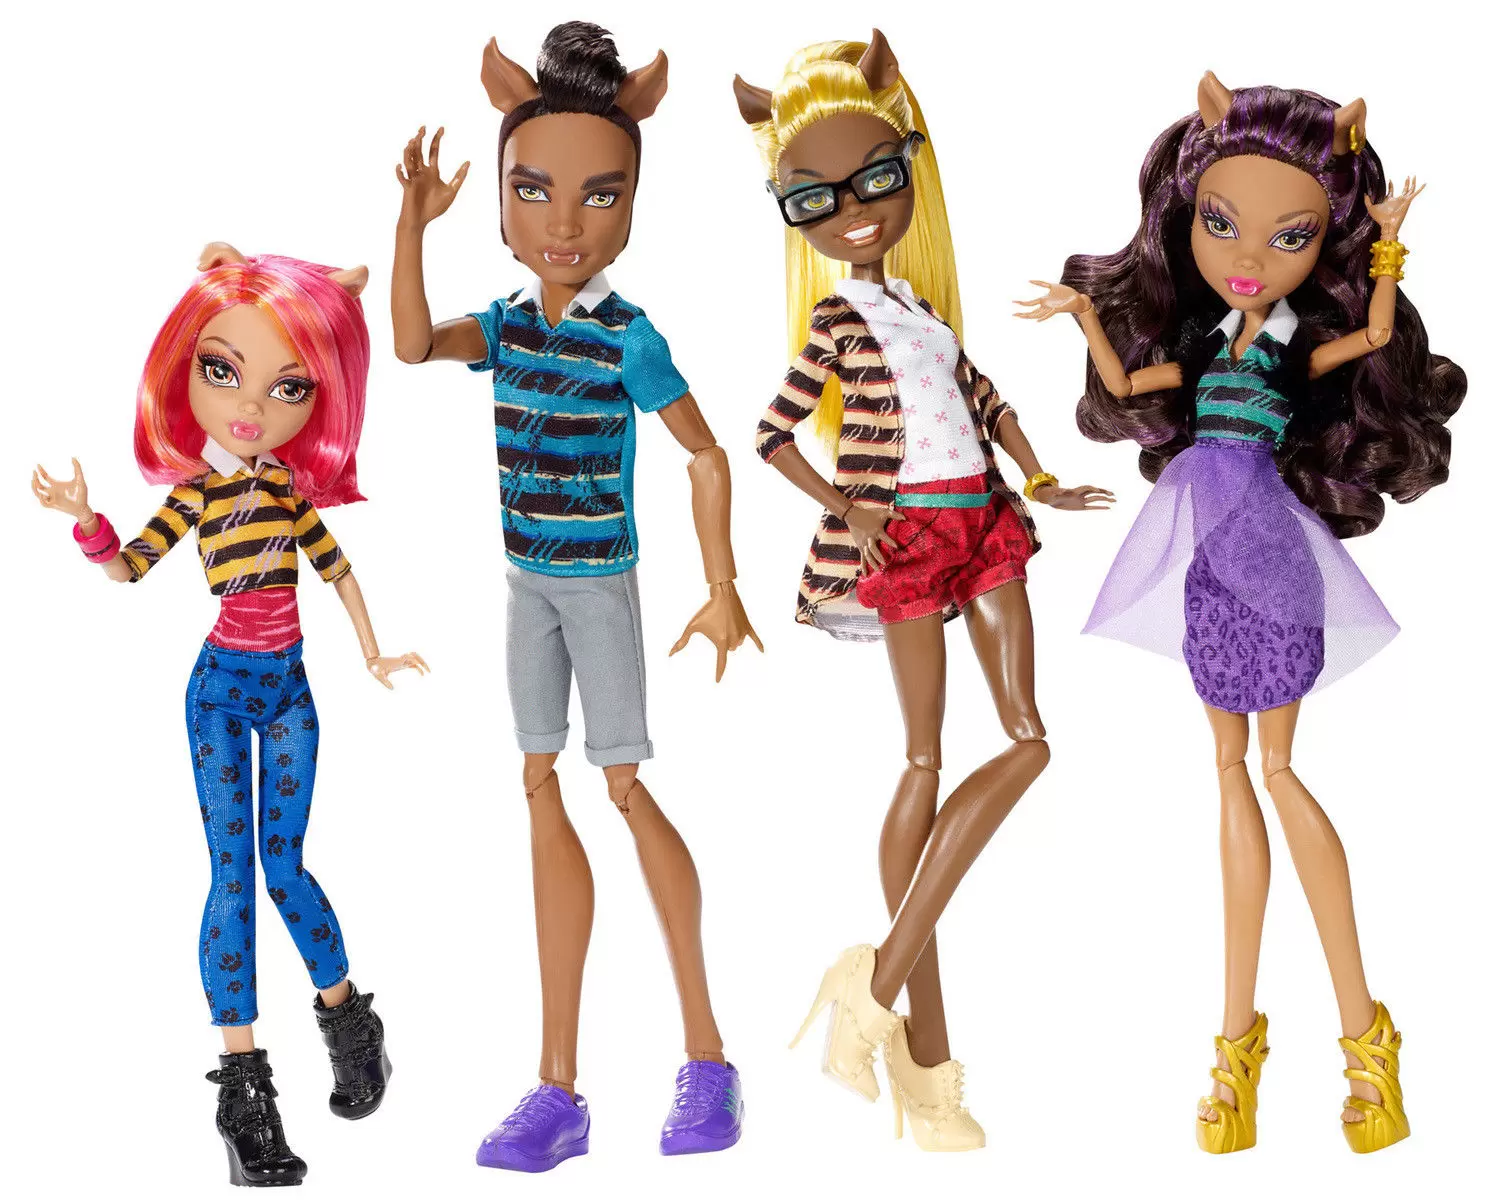 Monster High - Clawdeen, Howleen, Clawd & Clawdia - A Pack of Trouble